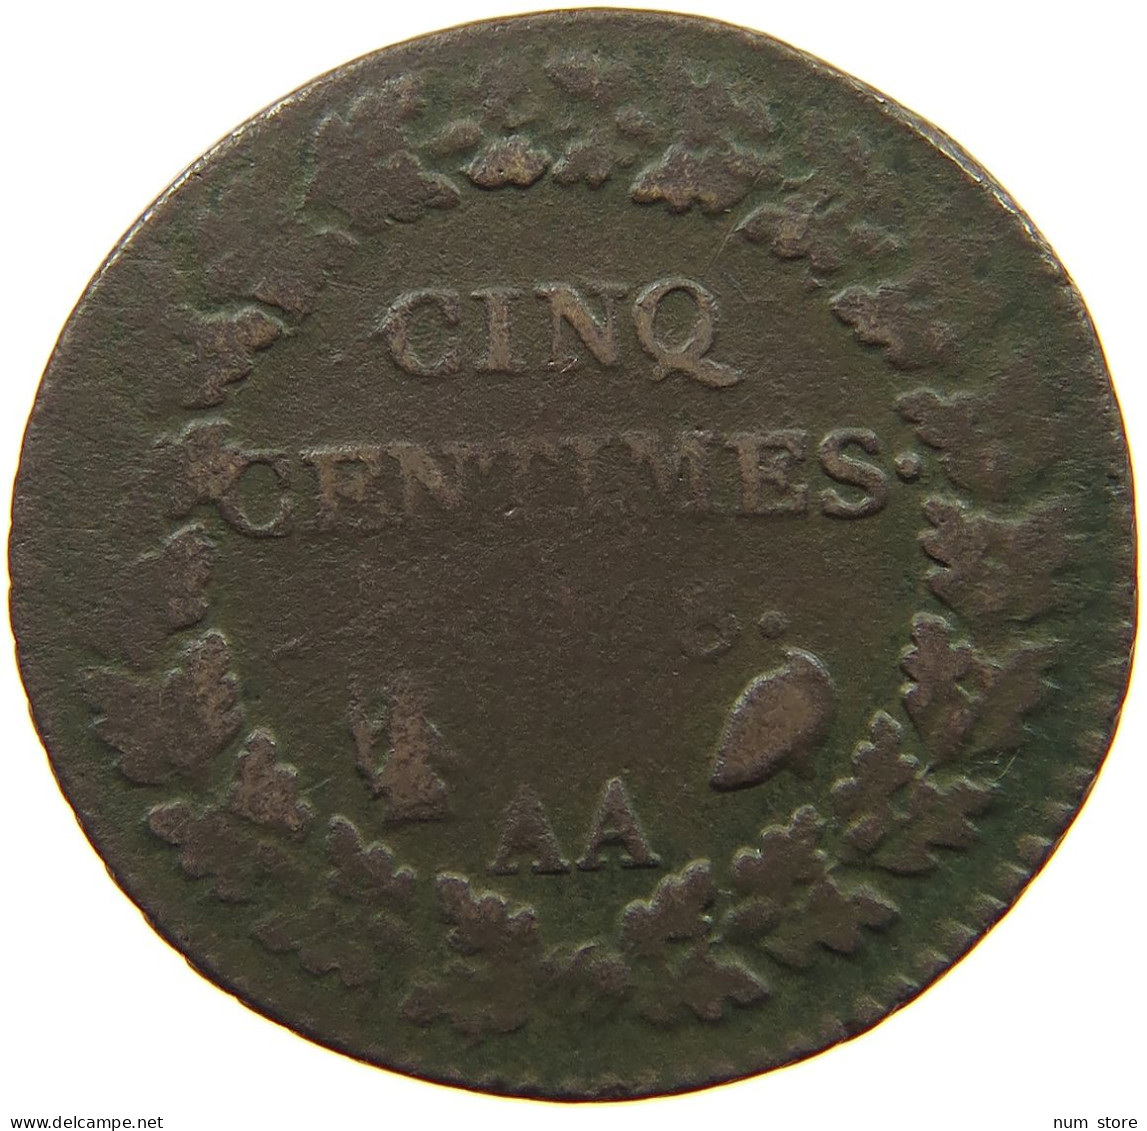 FRANCE 5 CENTIMES L'AN 8 AA  #t161 0209 - 5 Centimes